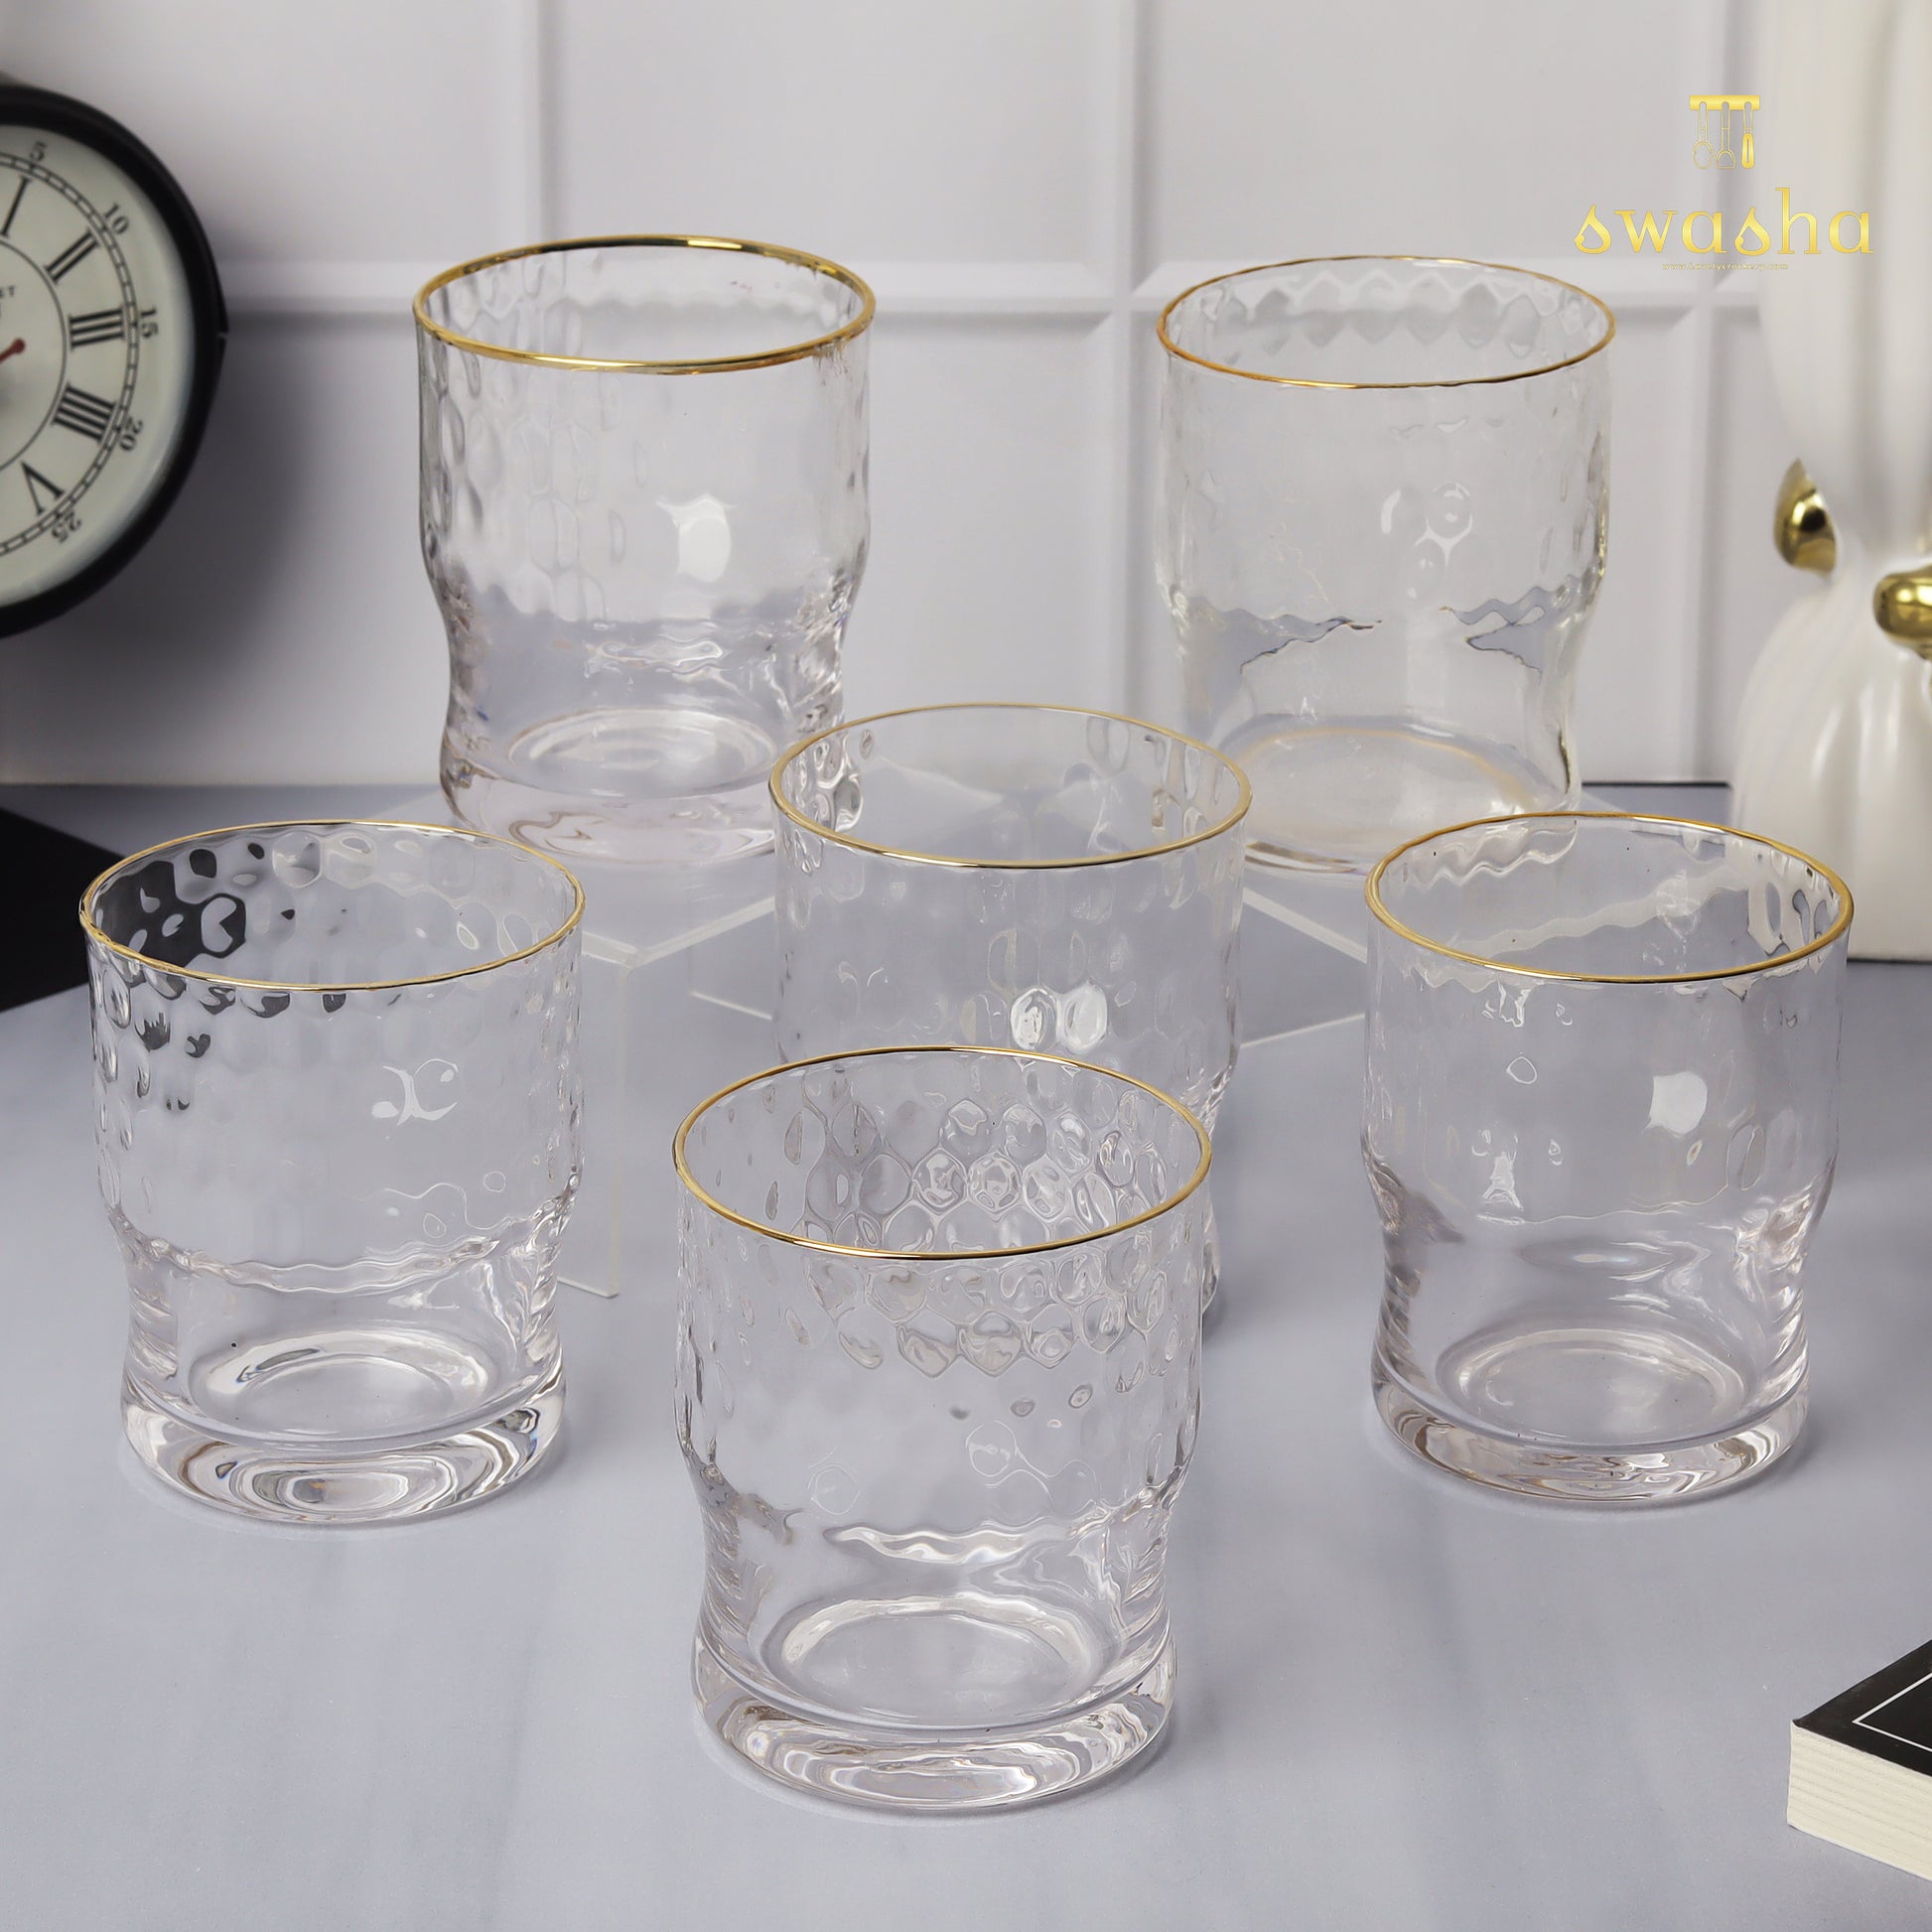 Set of 6 versatile glass tumblers - perfect for refreshing juices, whiskey and water.